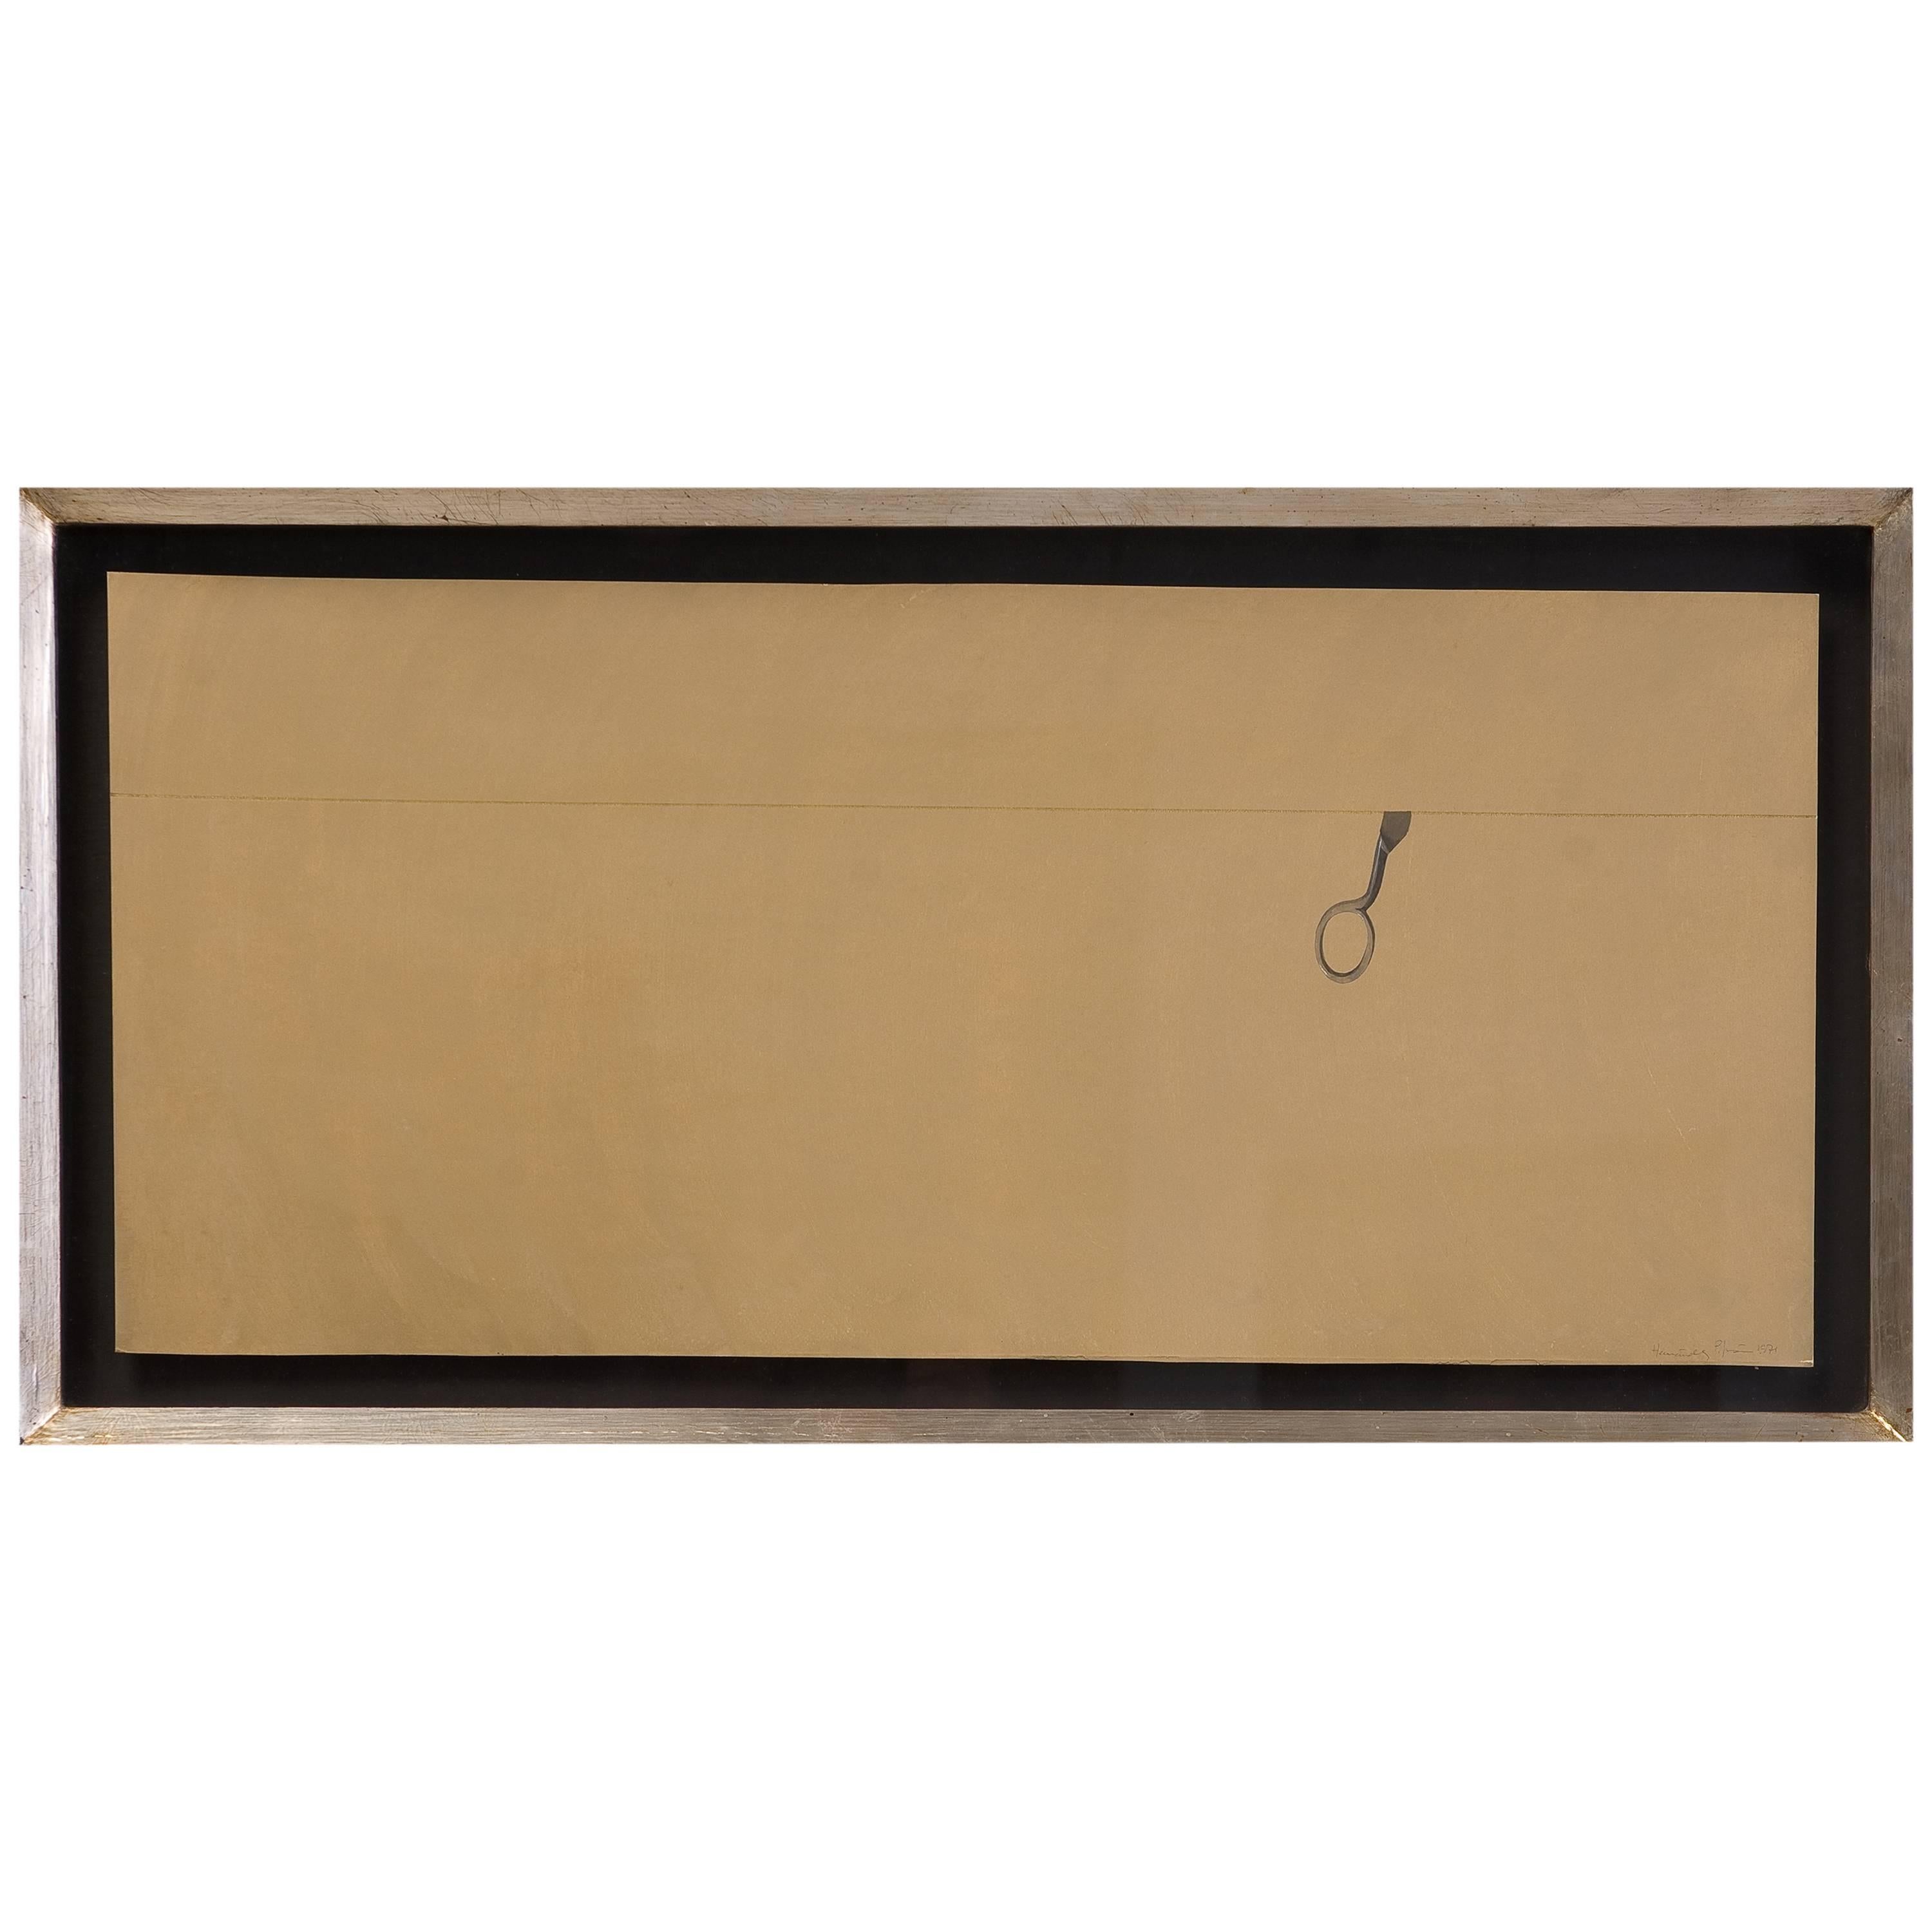 Hernández Pijoan, Untitled Signed an Dated 1971 For Sale